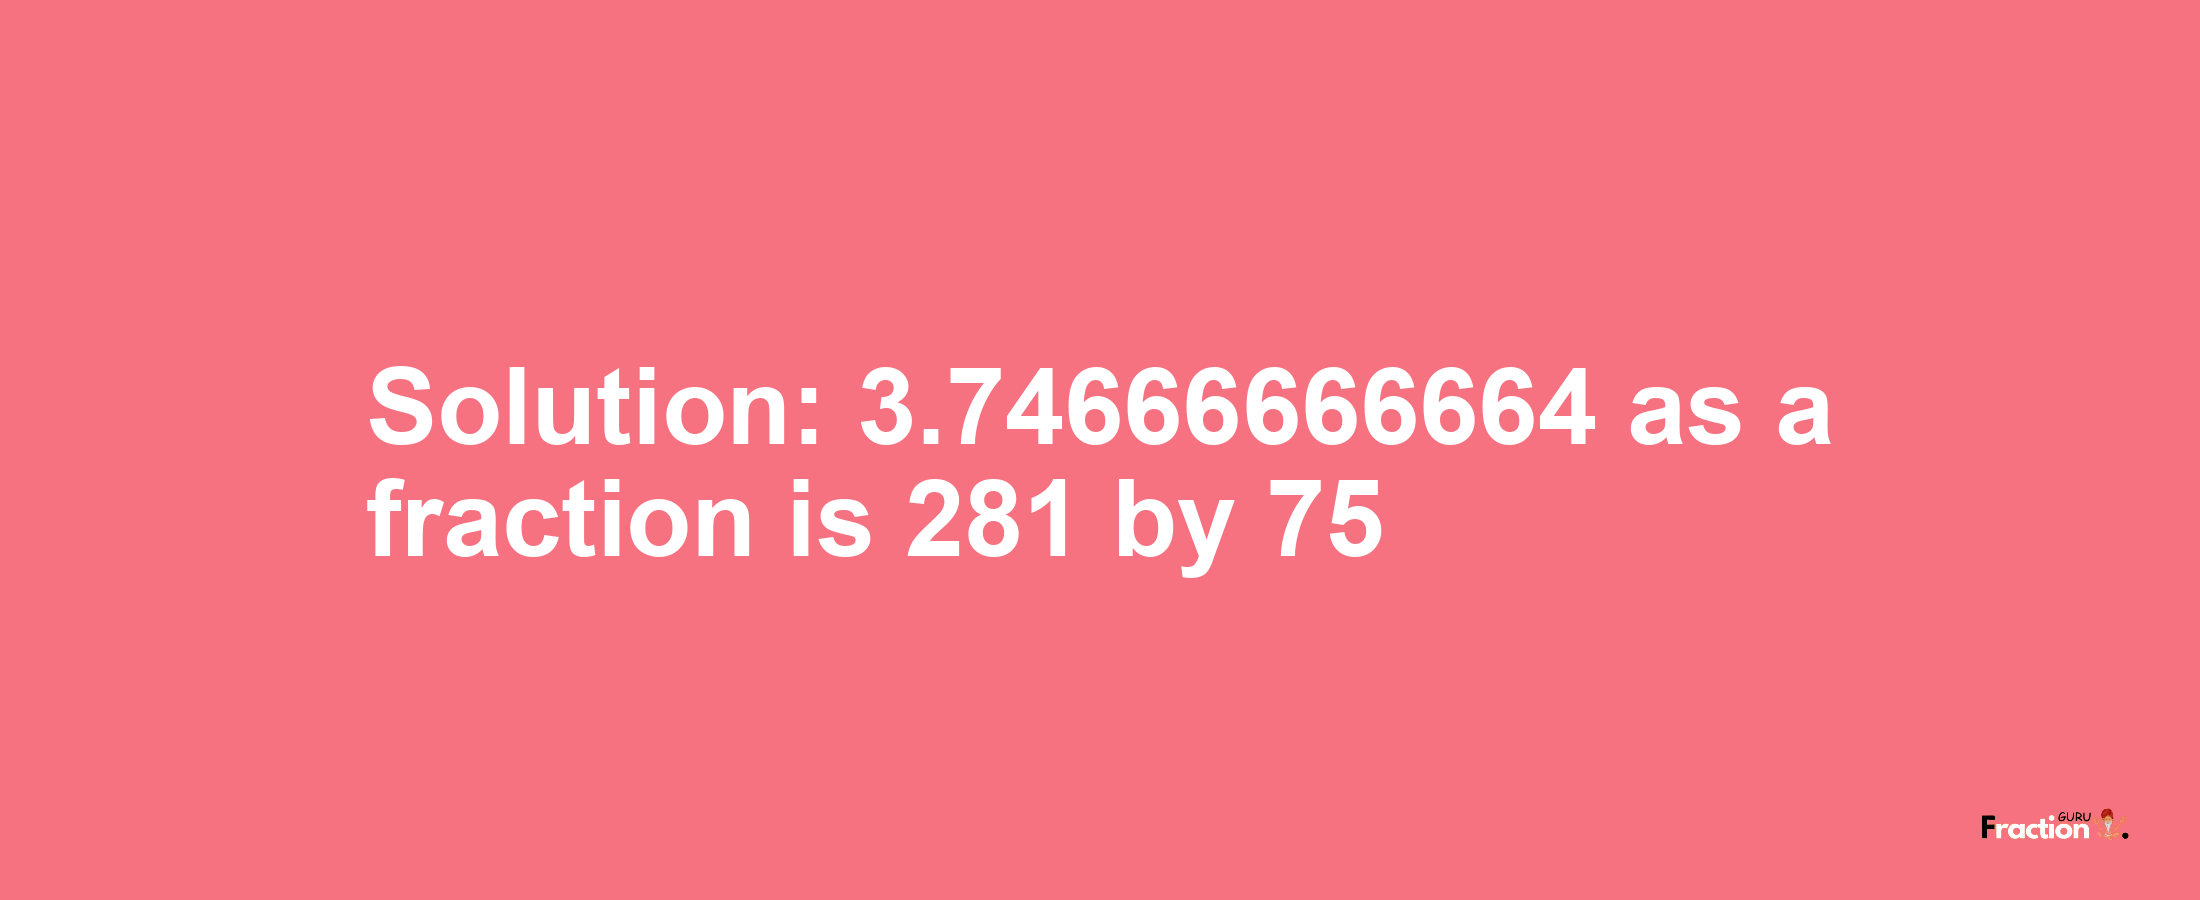 Solution:3.74666666664 as a fraction is 281/75